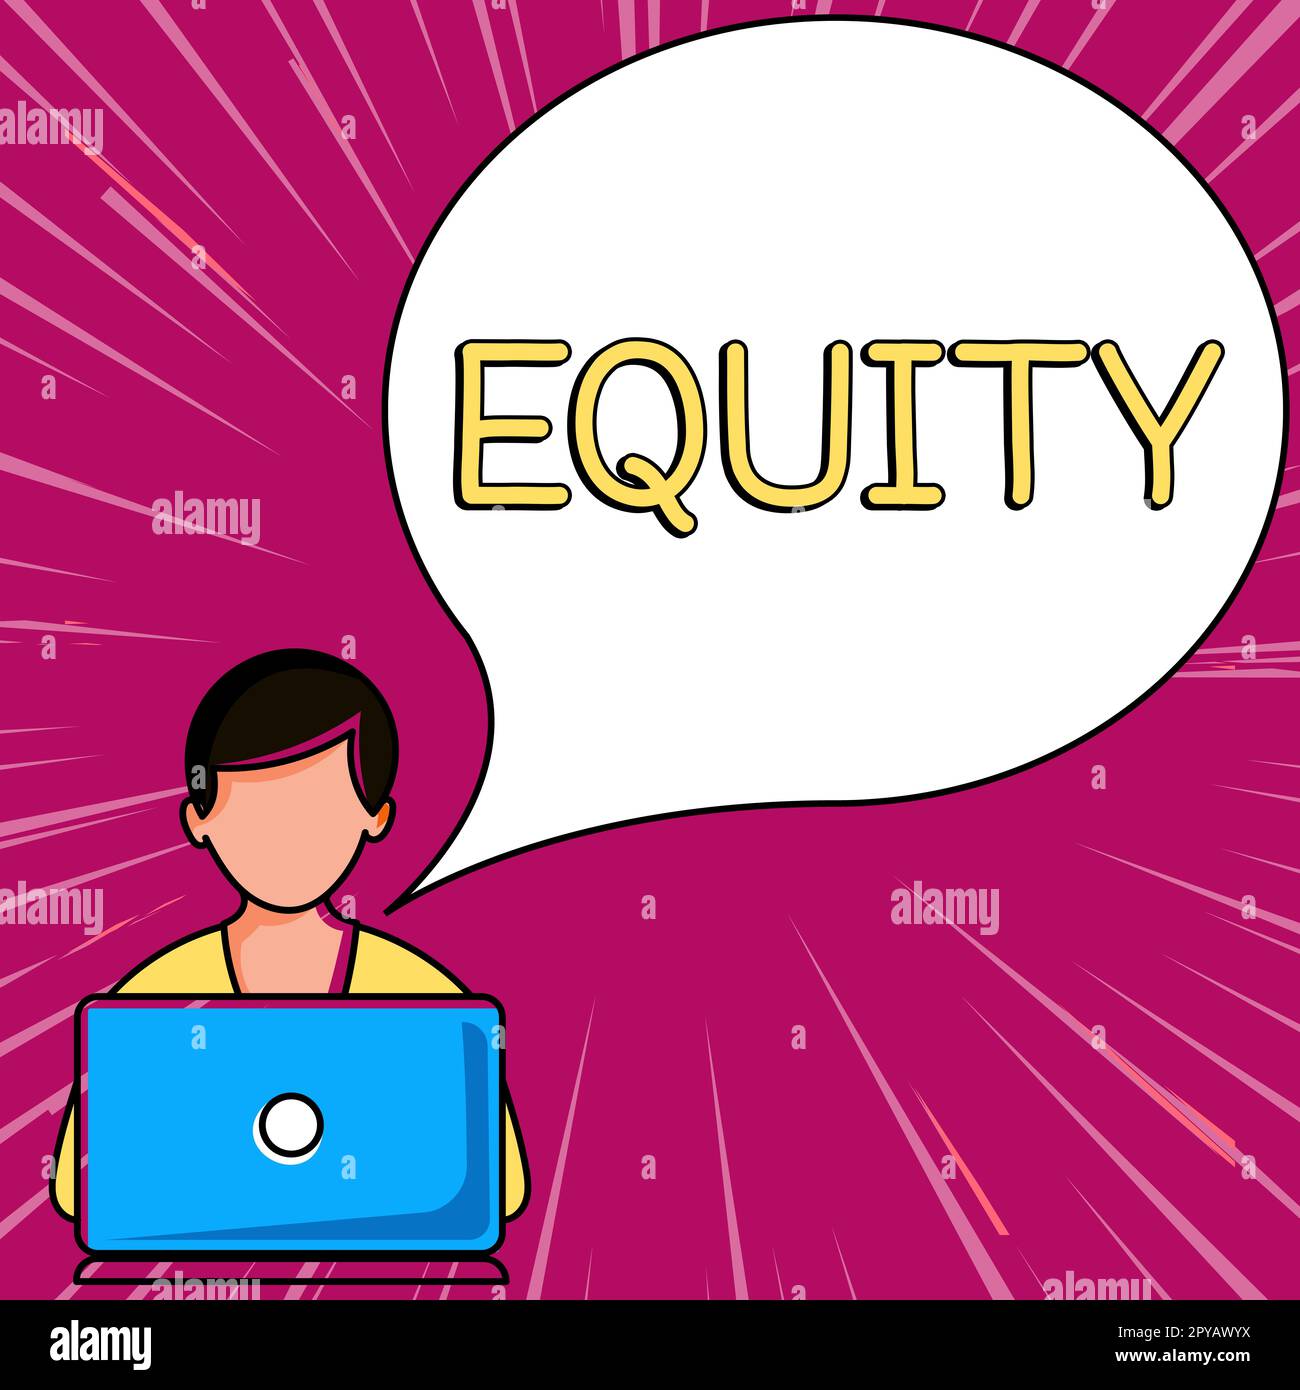 Sign displaying Equity. Business concept quality of being fair and impartial race free One hand Unity Stock Photo